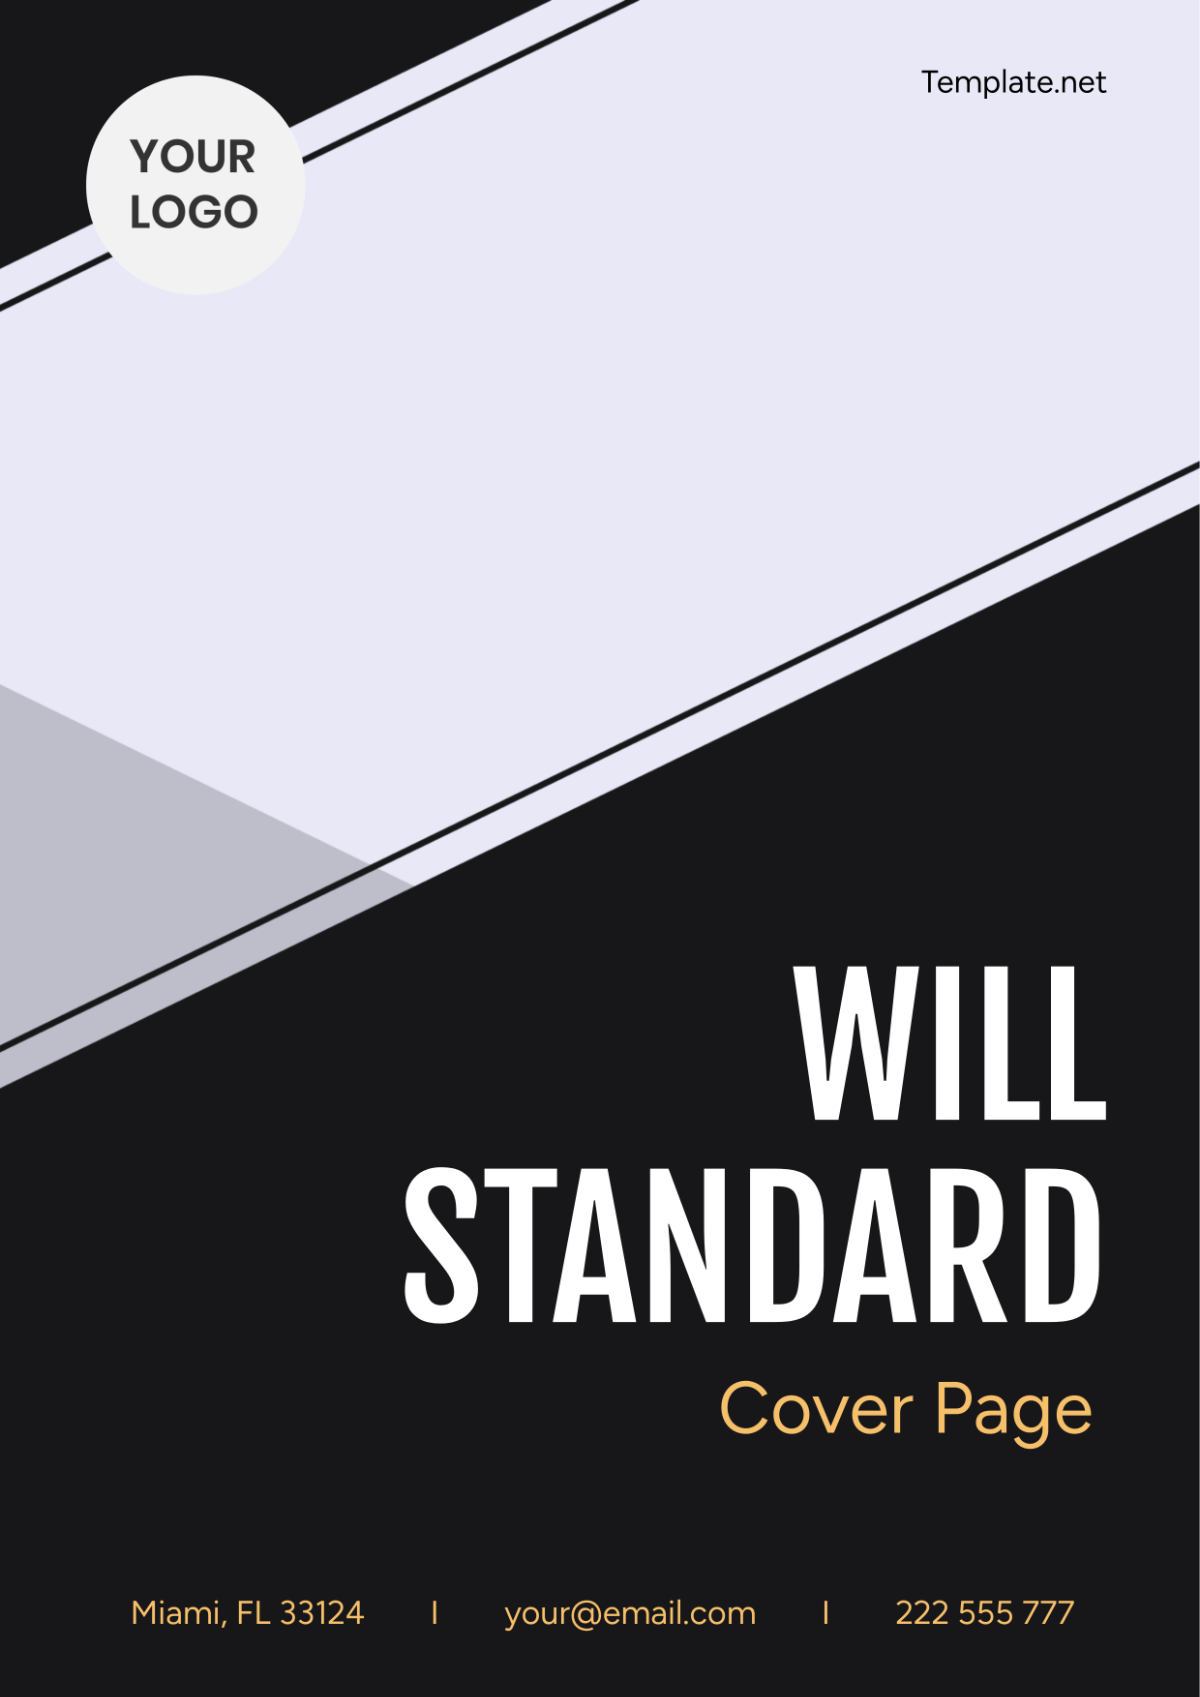 Free Will Standard Cover Page Template